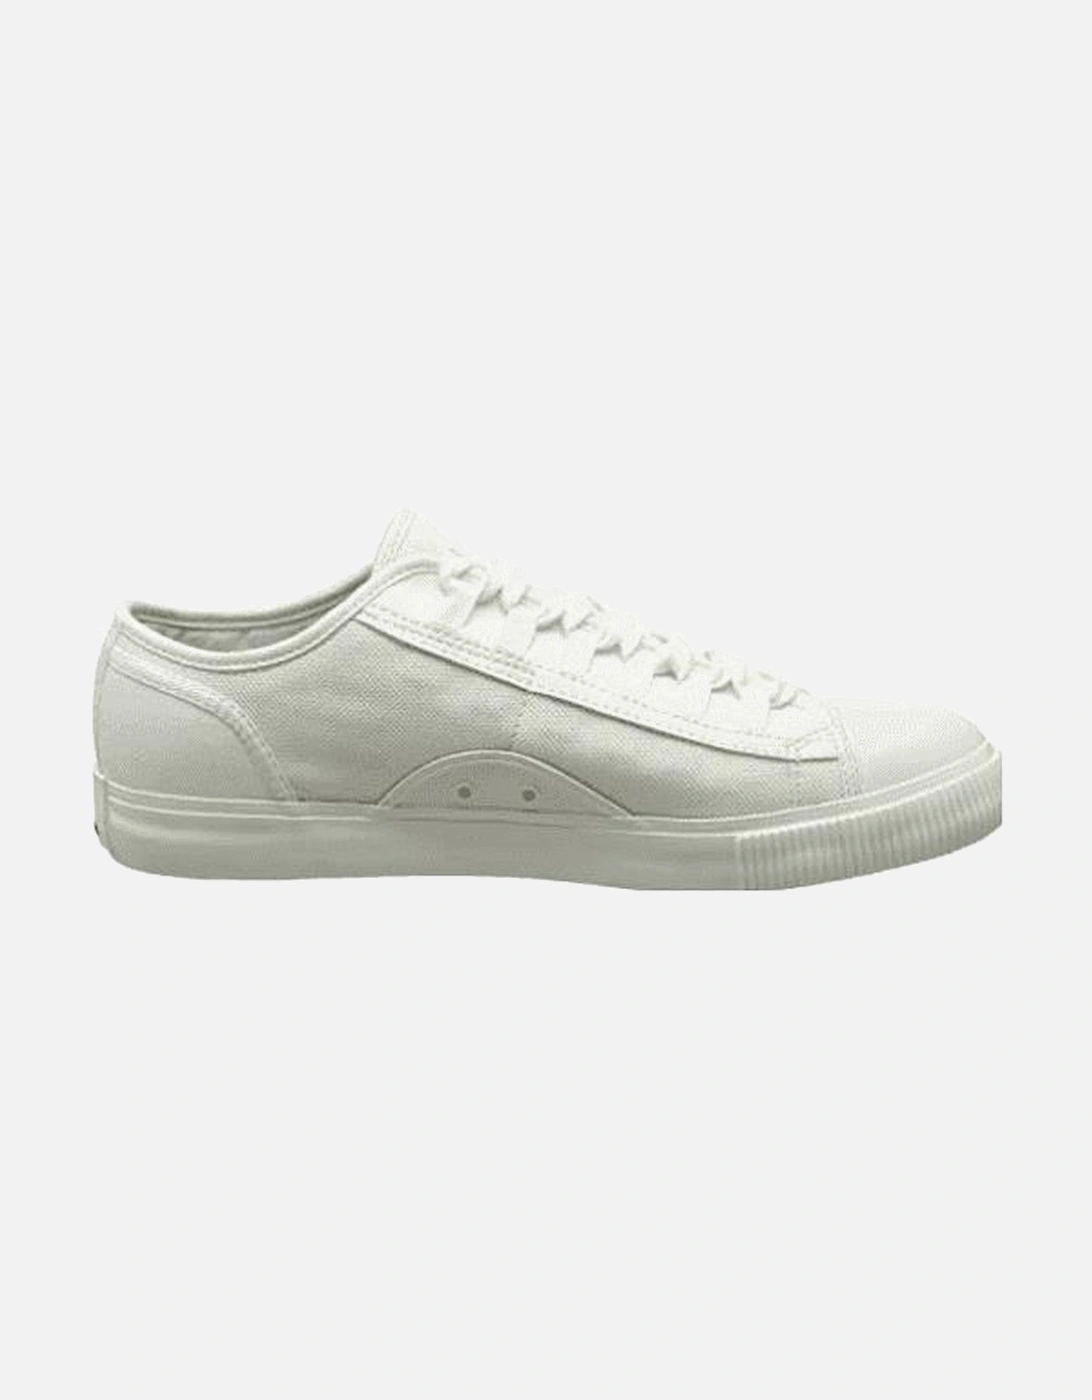 Lace Up Canvas Milk White Trainers